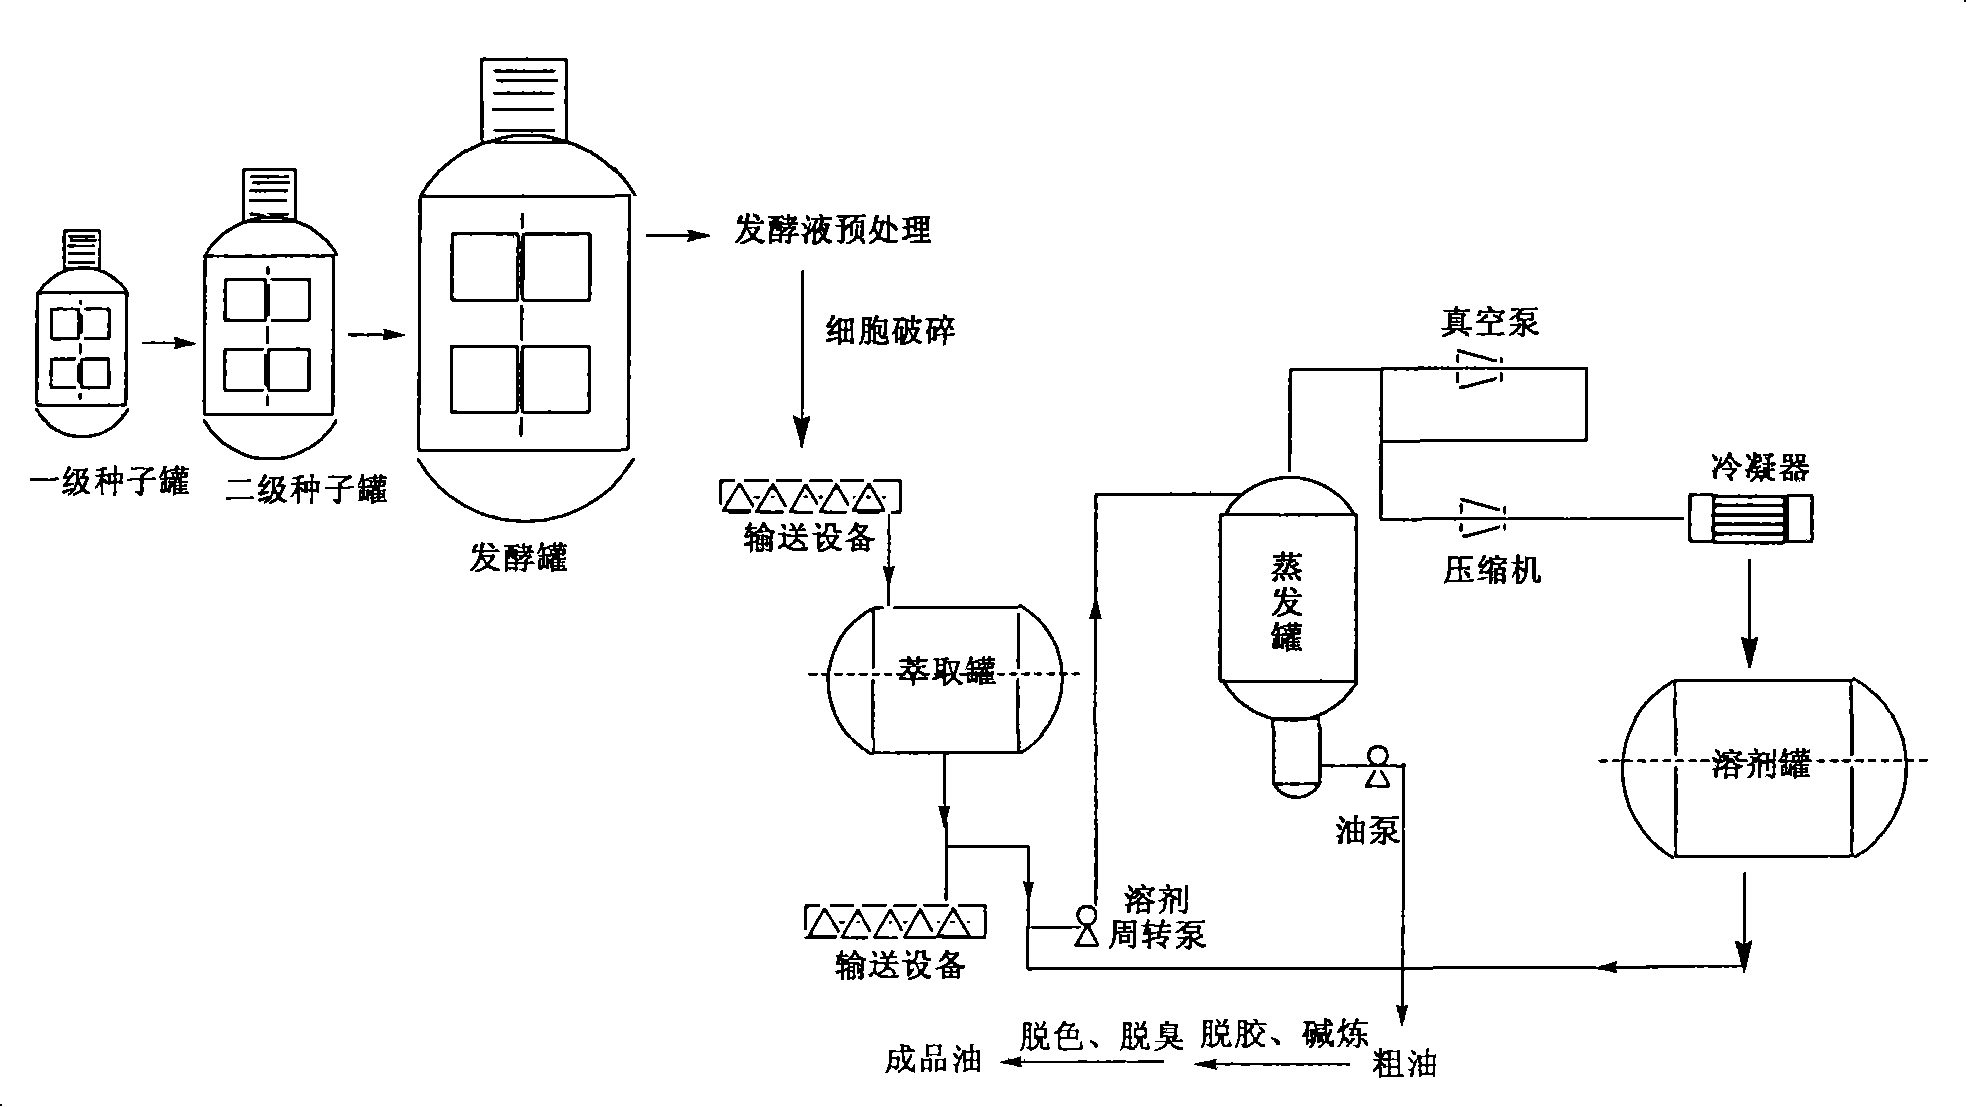 Technique for extracting and refining DHA enriched fatty acid from Crypthecodinium cohnii